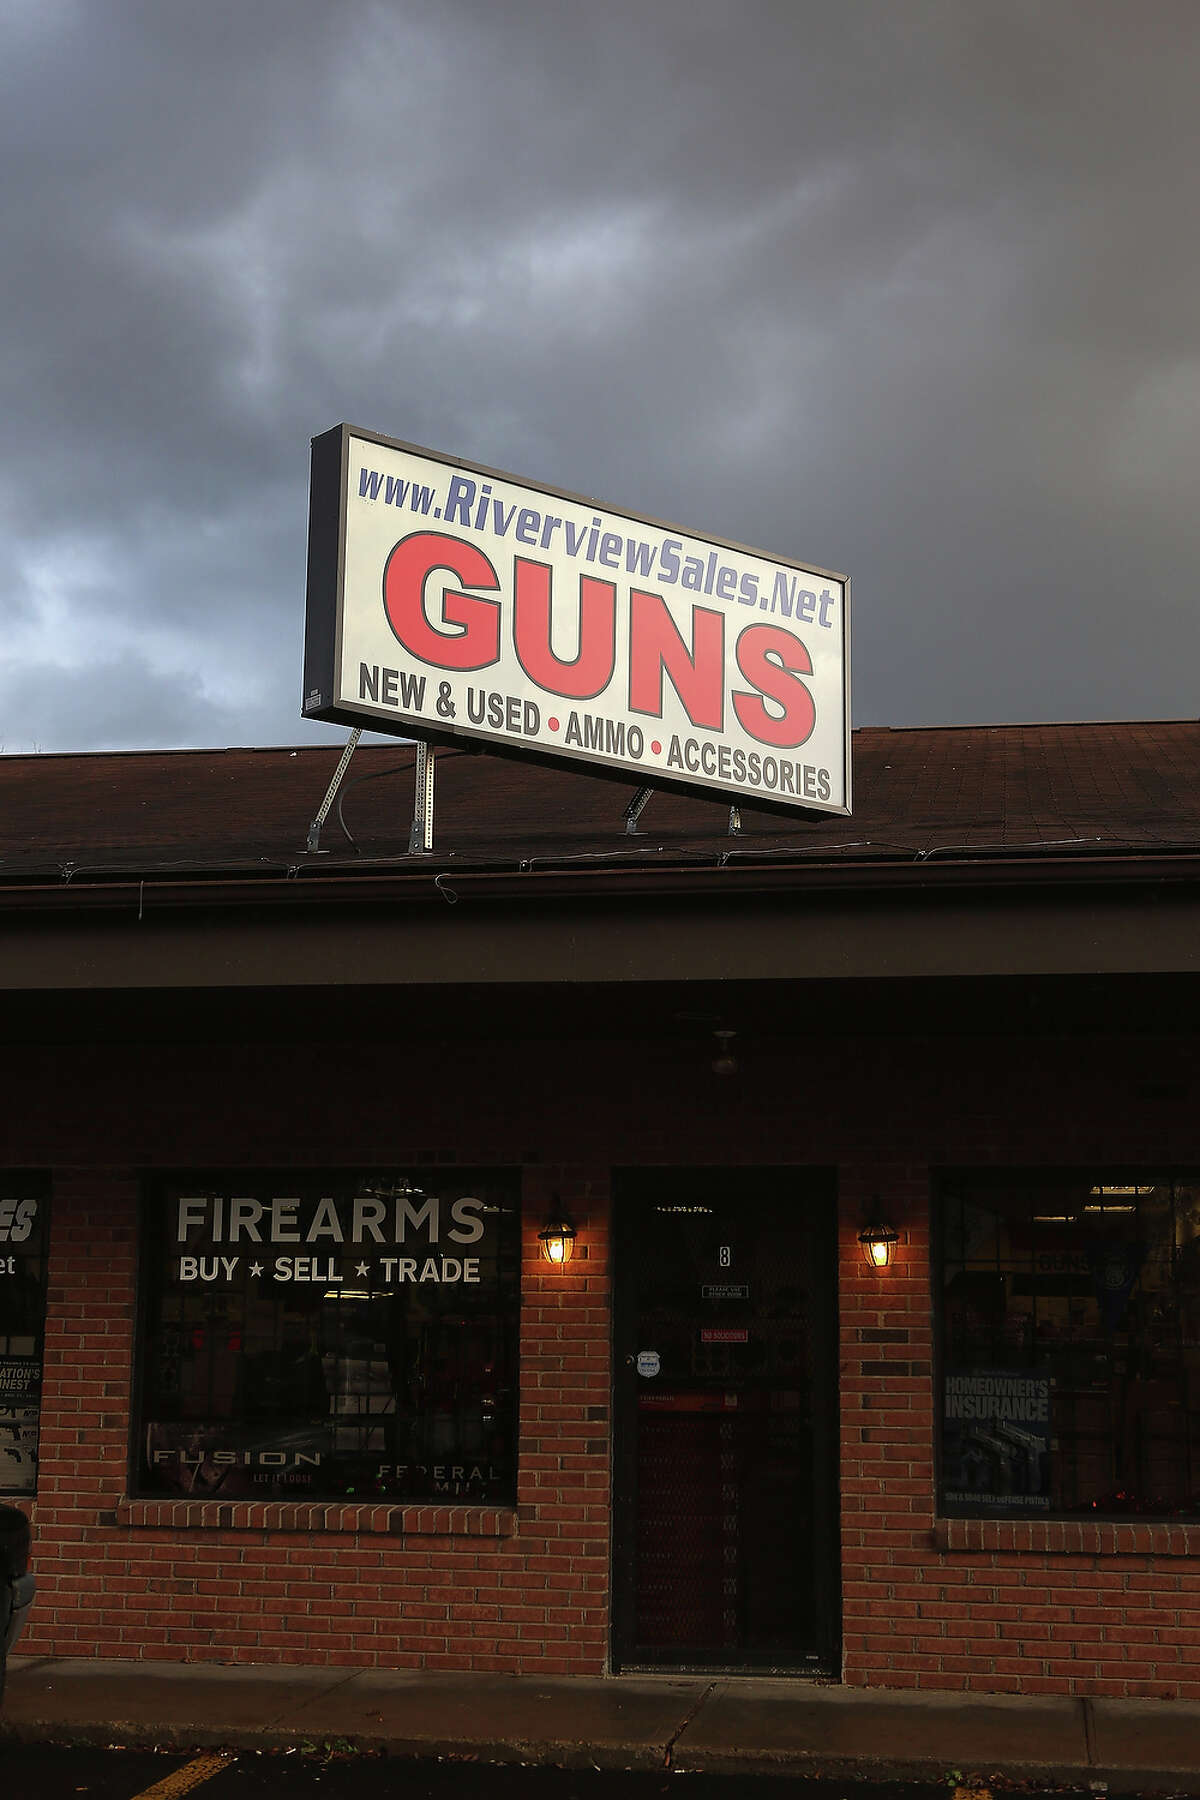 The Riverview Gun Sales shop sits closed on December 21, 2012 in East Windsor, Connecticut. According to the Hartford Courant, sources investigating the massacre at the Sandy Hook Elementary School in Newtown have said the Bushmaster rifle used by the gunman Adam Lanza was legally purchased at the shop by his mother Nancy Lanza. The Courant also reports that records show the guns used in a previous mass shooting in Connecticut in 2010, where Omar Thornton killed eight people and himself at Hartford Distributers Inc, were also purchased at Riverview Gun Sales. On Thursday agents from the federal Bureau of Alcohol, Tobacco, Firearms and Explosives (ATF), and local police raided and closed the gun shop.